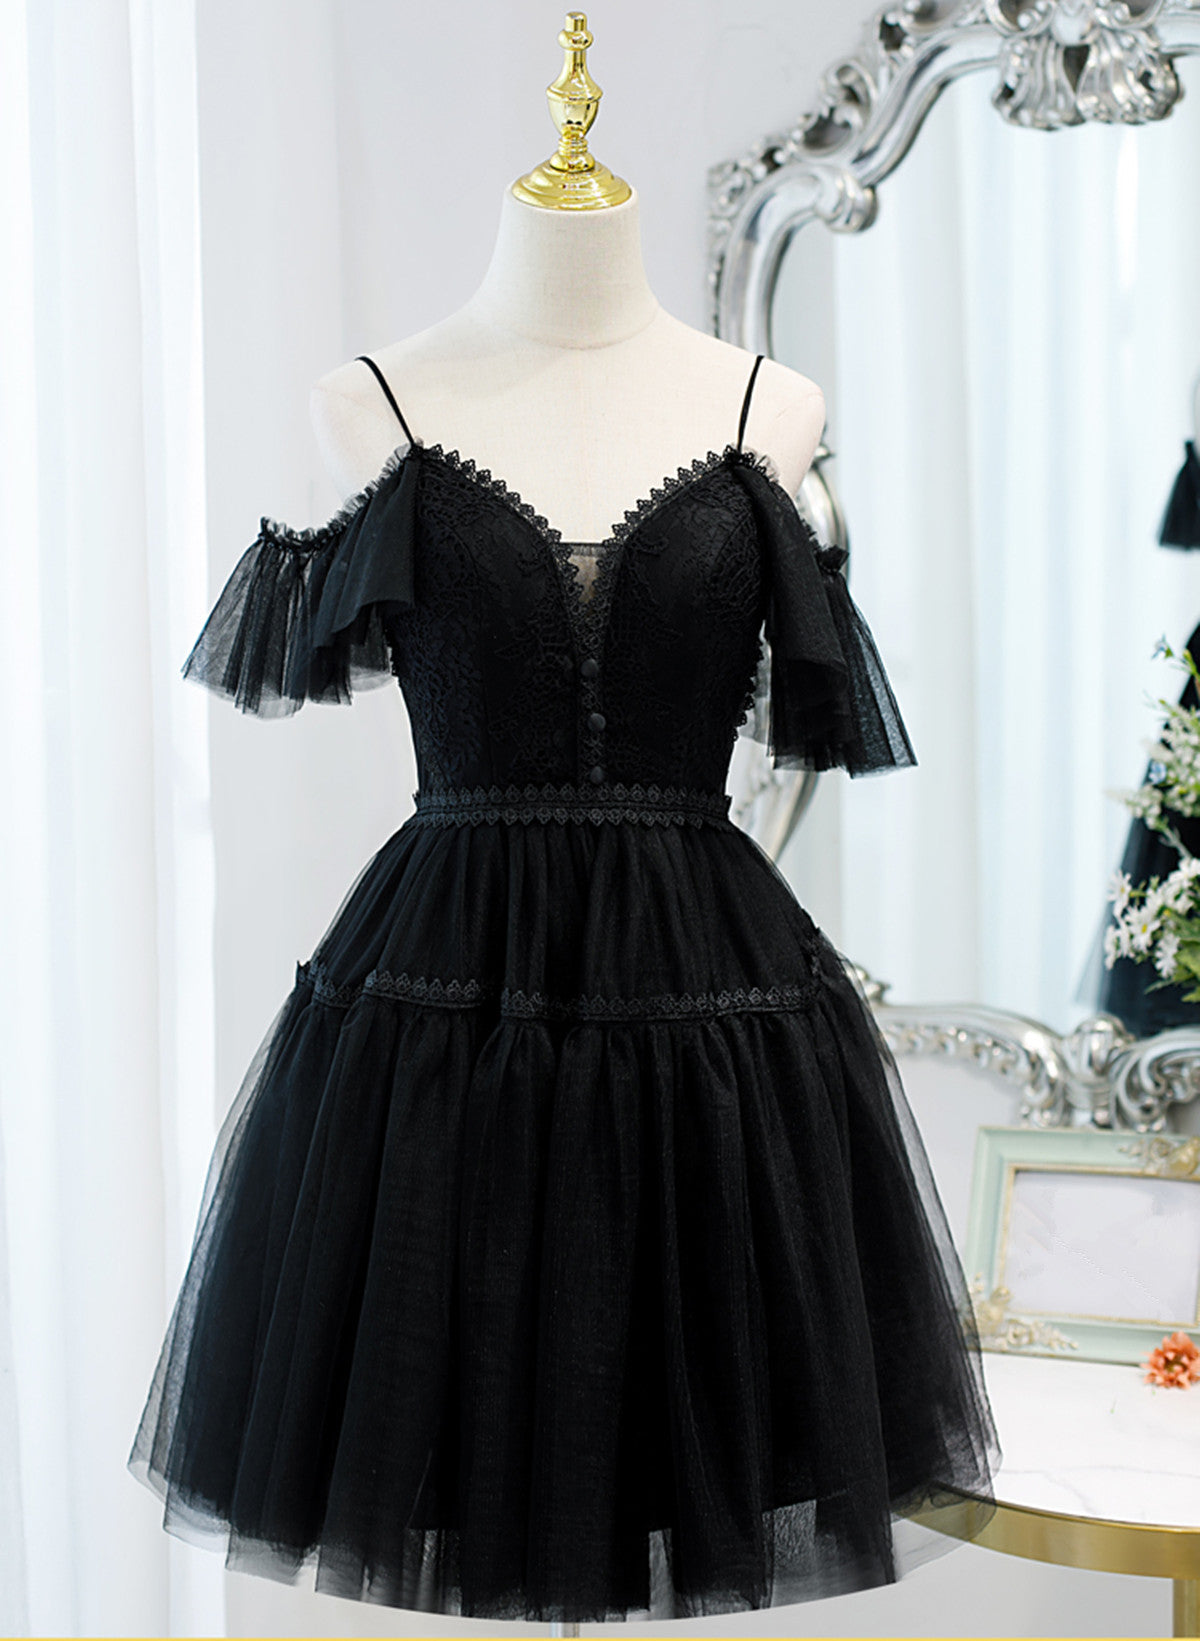 Black Sweetheart Straps Tulle Corset Homecoming Dress, Black Off Shoulder Corset Prom Dress outfits, Bridesmaids Dresses On Sale